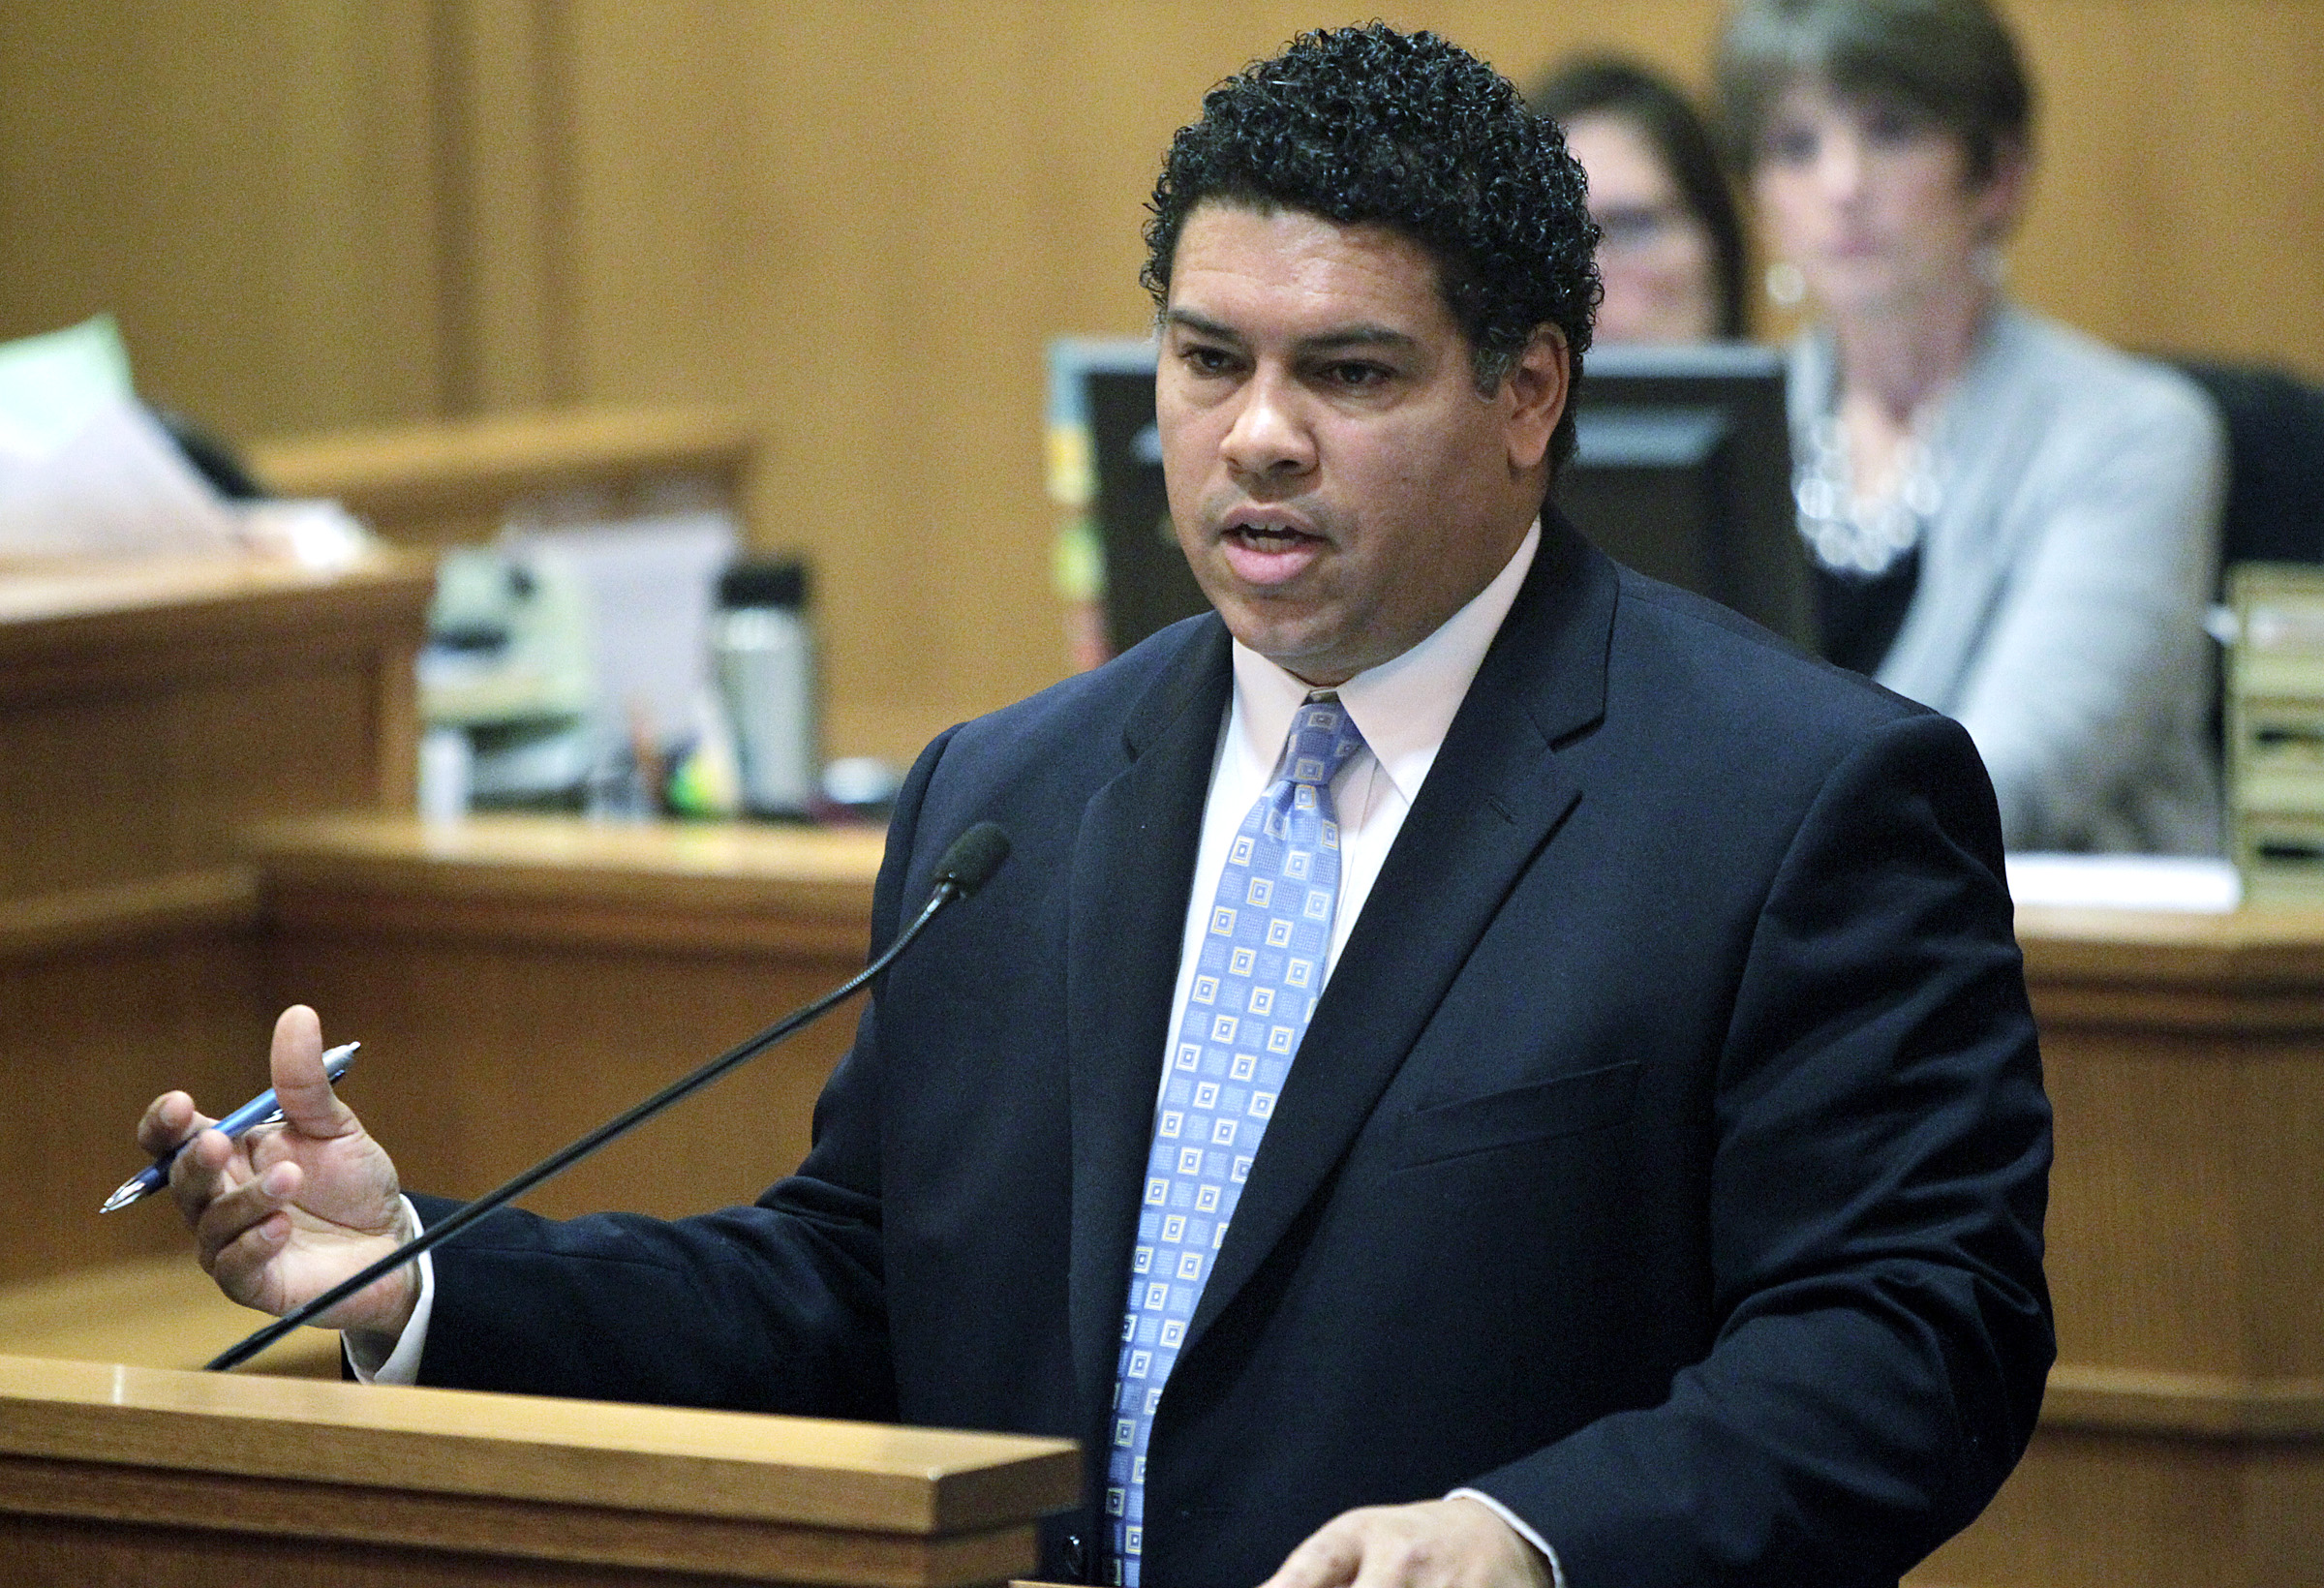 In this Feb. 26, 2013 file photo, Dane County, Wisconsin, District Attorney Ismael Ozanne speaks in a  Madison, Wis., court. Ozanne is weighing whether to file charges against Madison Officer Matt Kenny in Tony Robinsons death. (Michael P. King—AP)